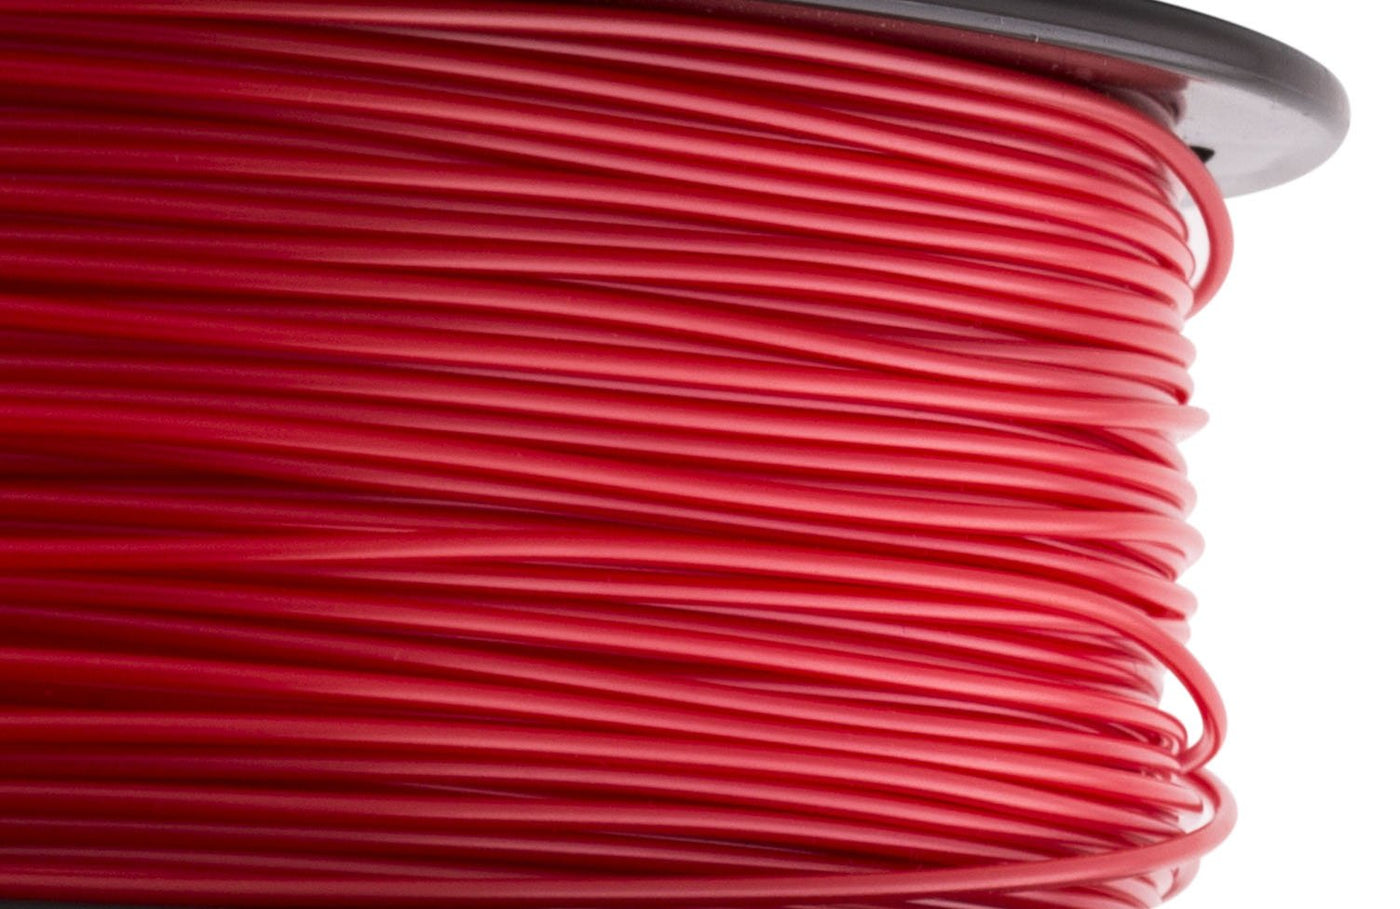 RED ABS FILAMENT - 1.75MM, 1KG SPOOL